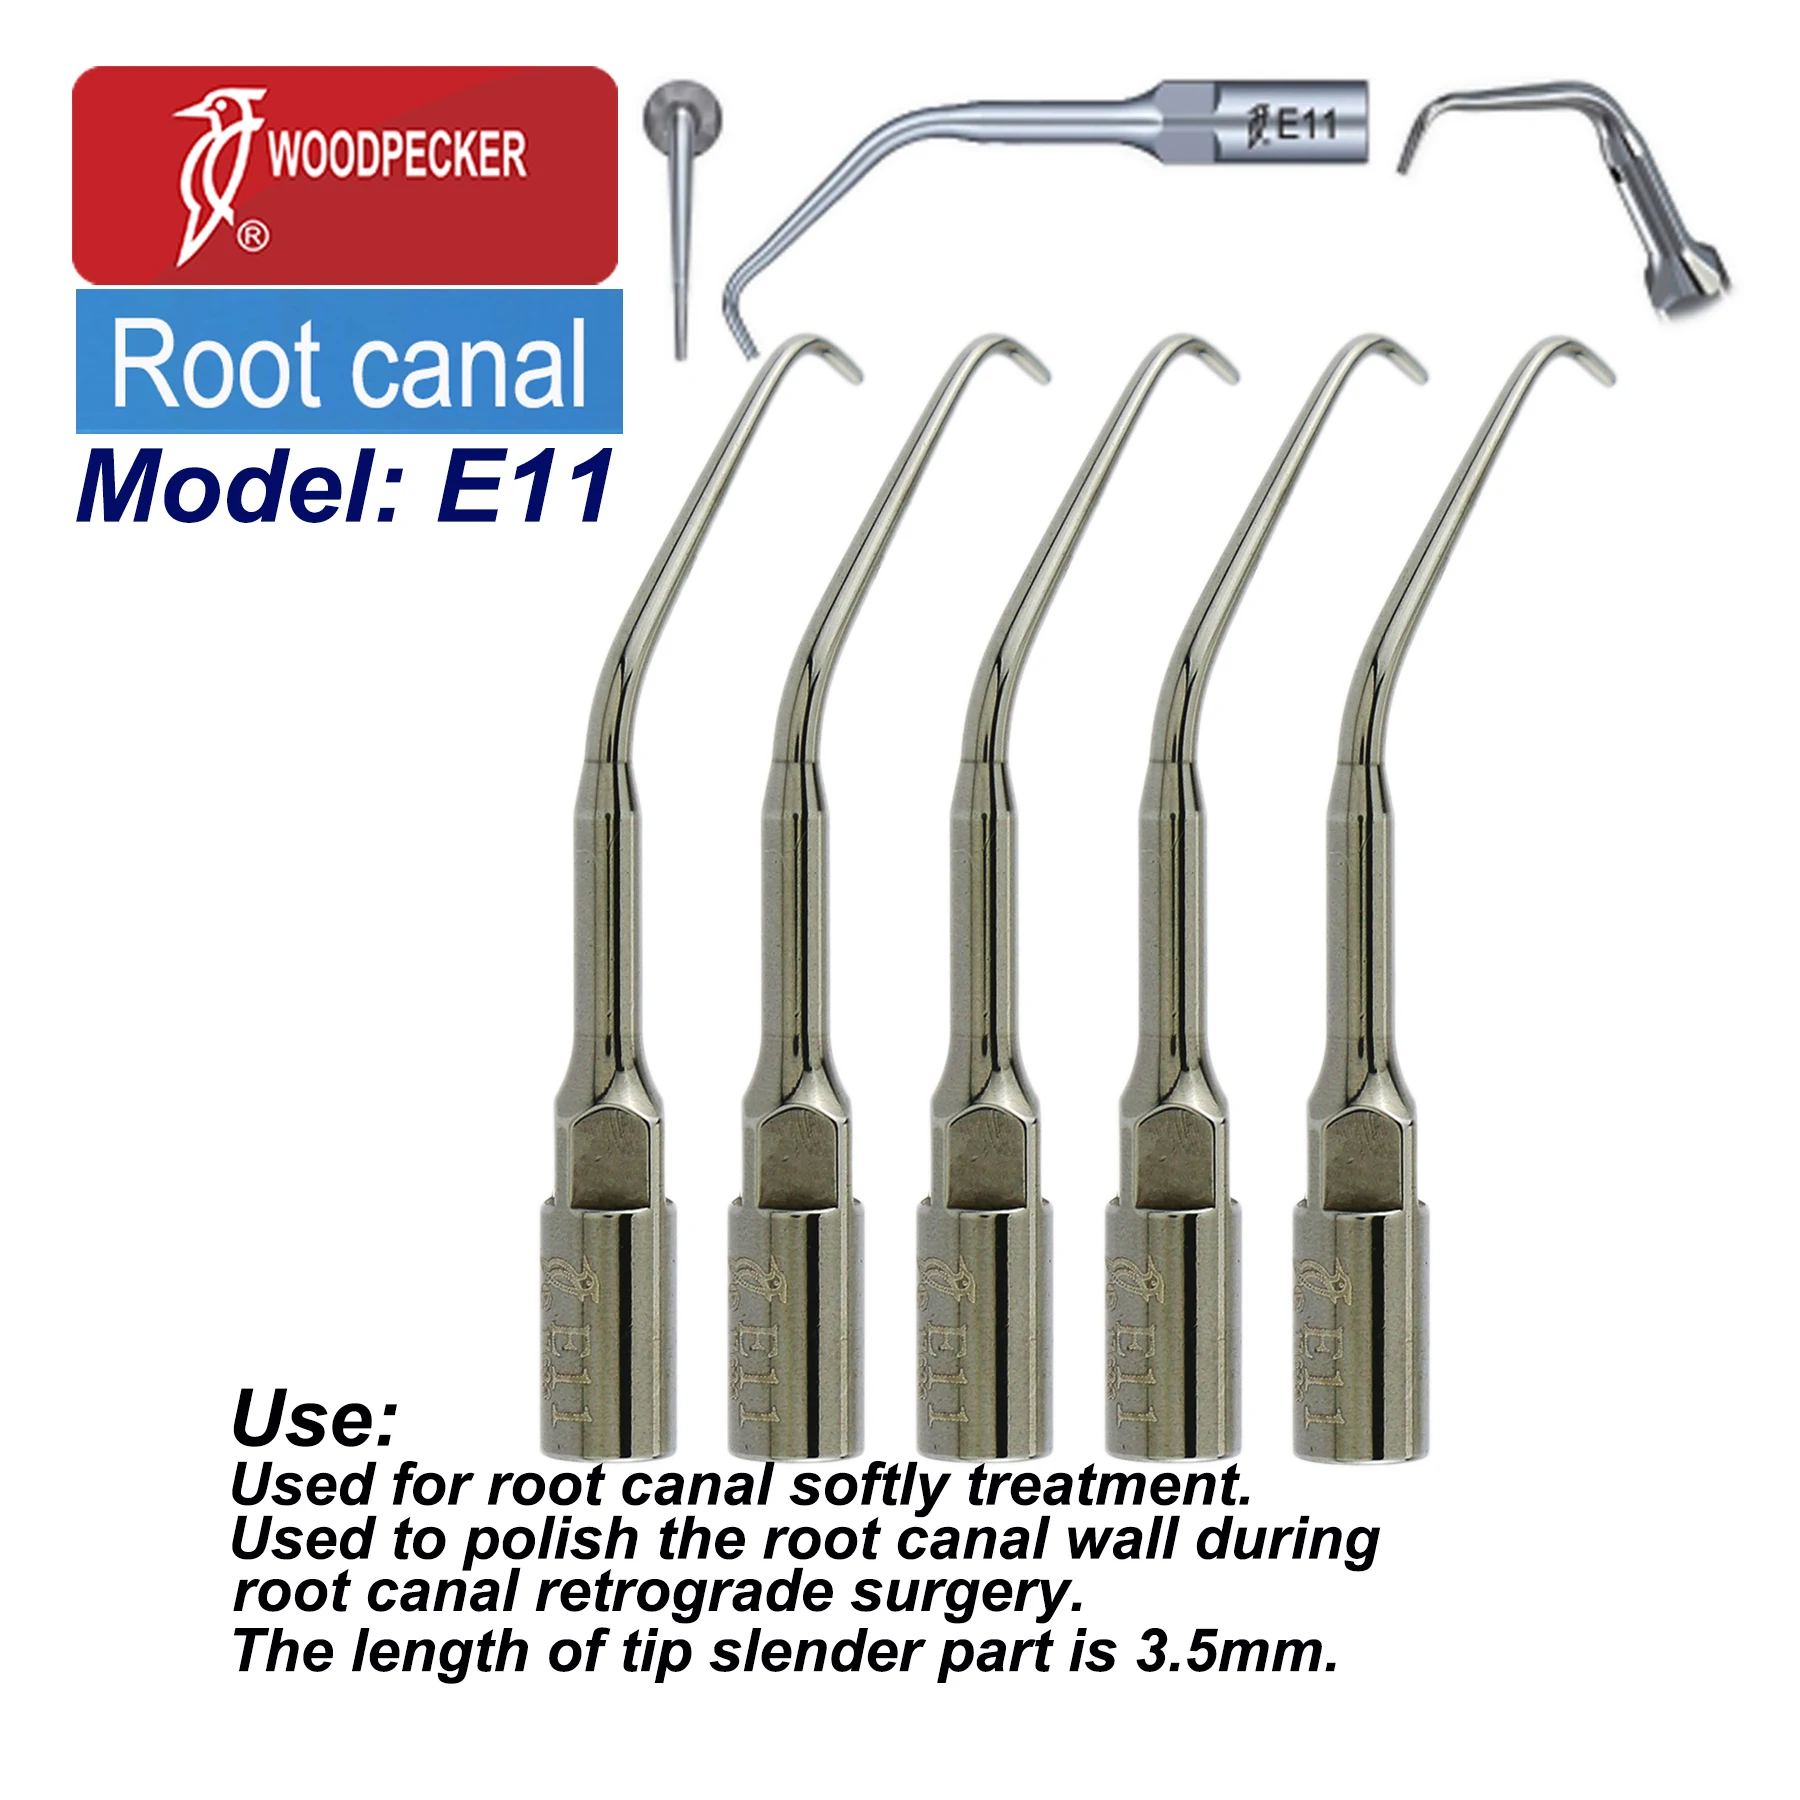 5pcs Woodpecker Dental Ultrasonic Scaler Root Canal Surgery Tips Polish Pulp Wall During Retrograde Surgery Fit UDS EMS E11